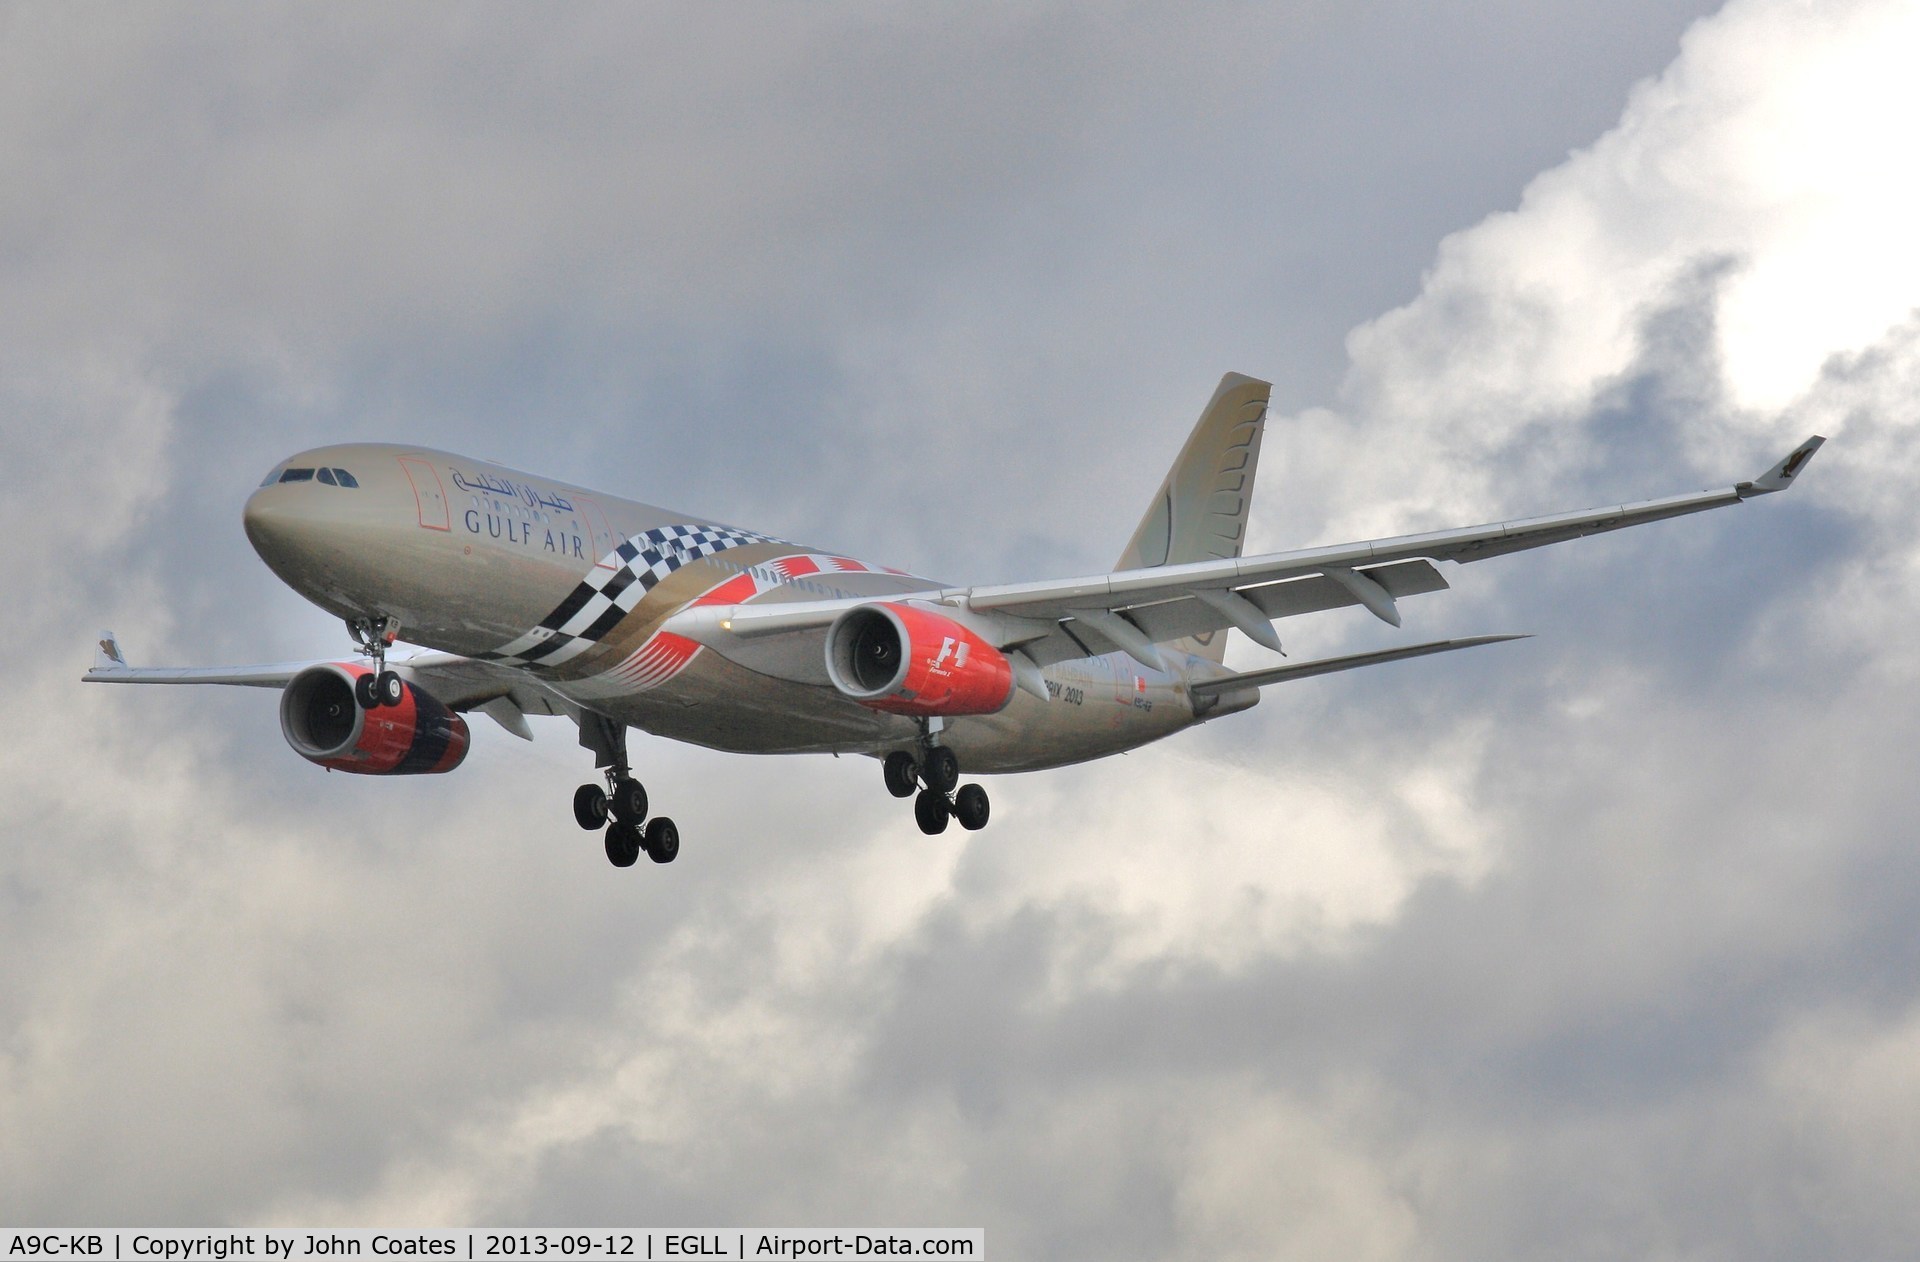 A9C-KB, 1999 Airbus A330-243 C/N 281, On approach to 27R with Bahrain Grand Prix 2013 logos.